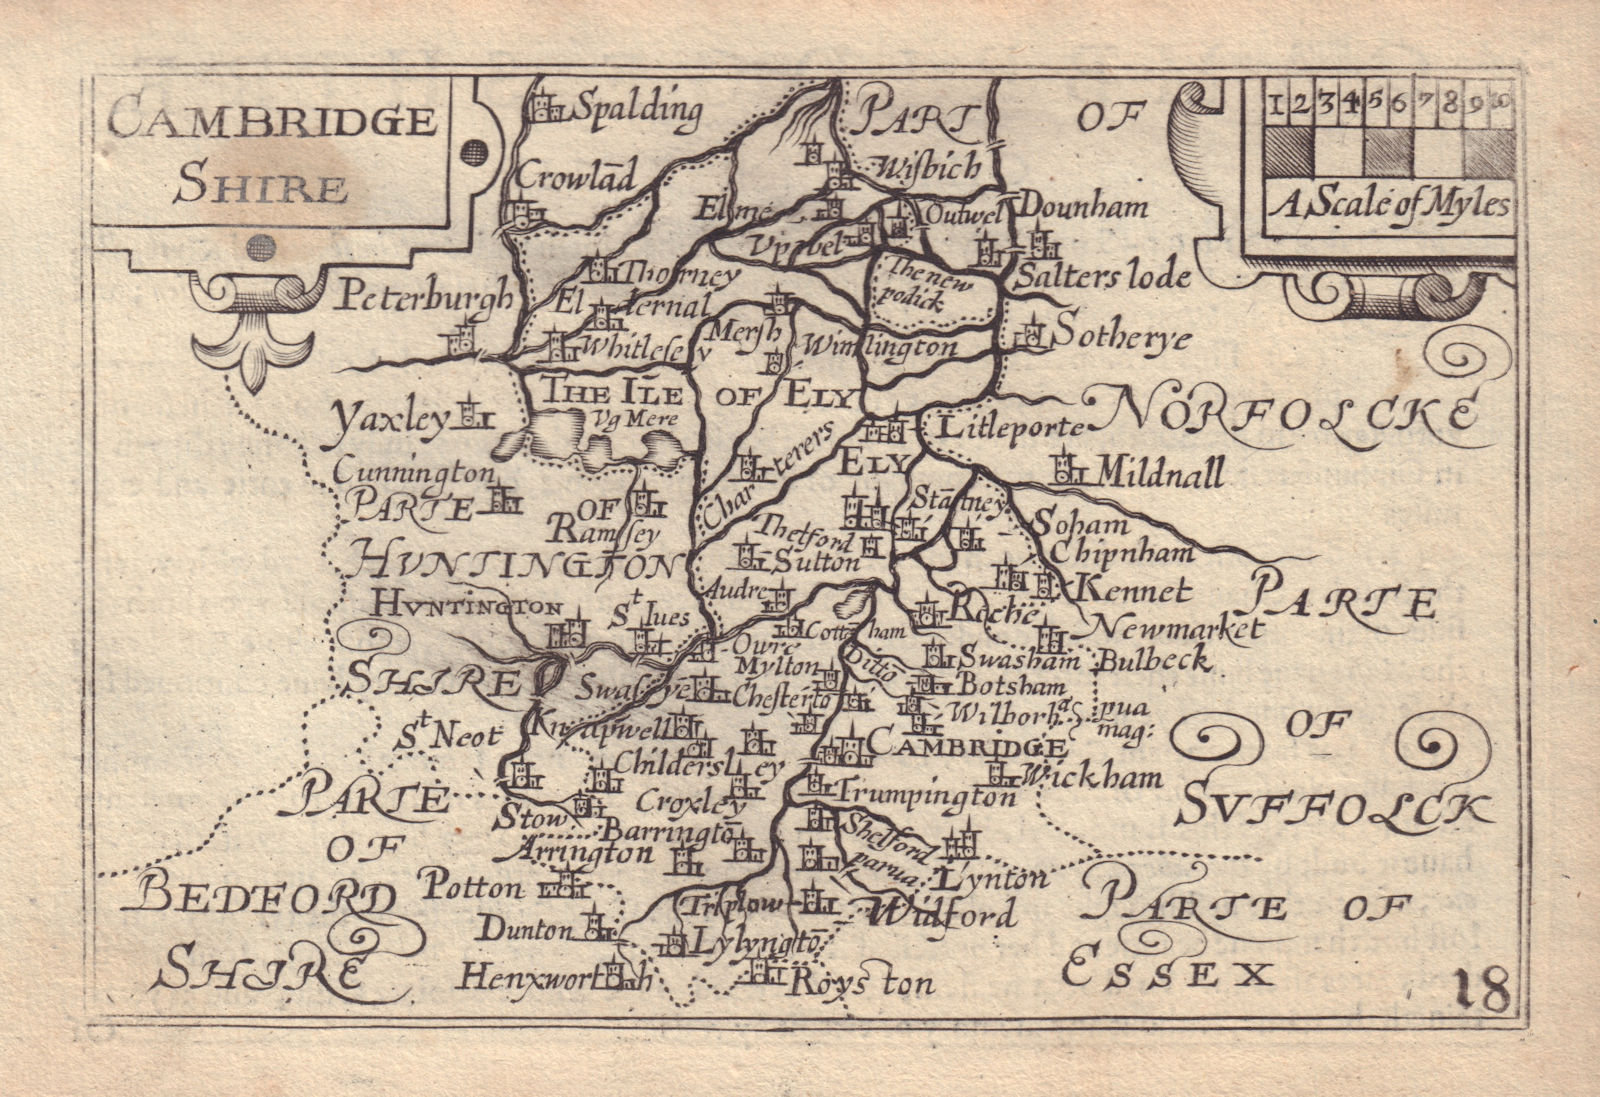 Cambridge Shire by Keere. "Speed miniature" Cambridgeshire county map 1632